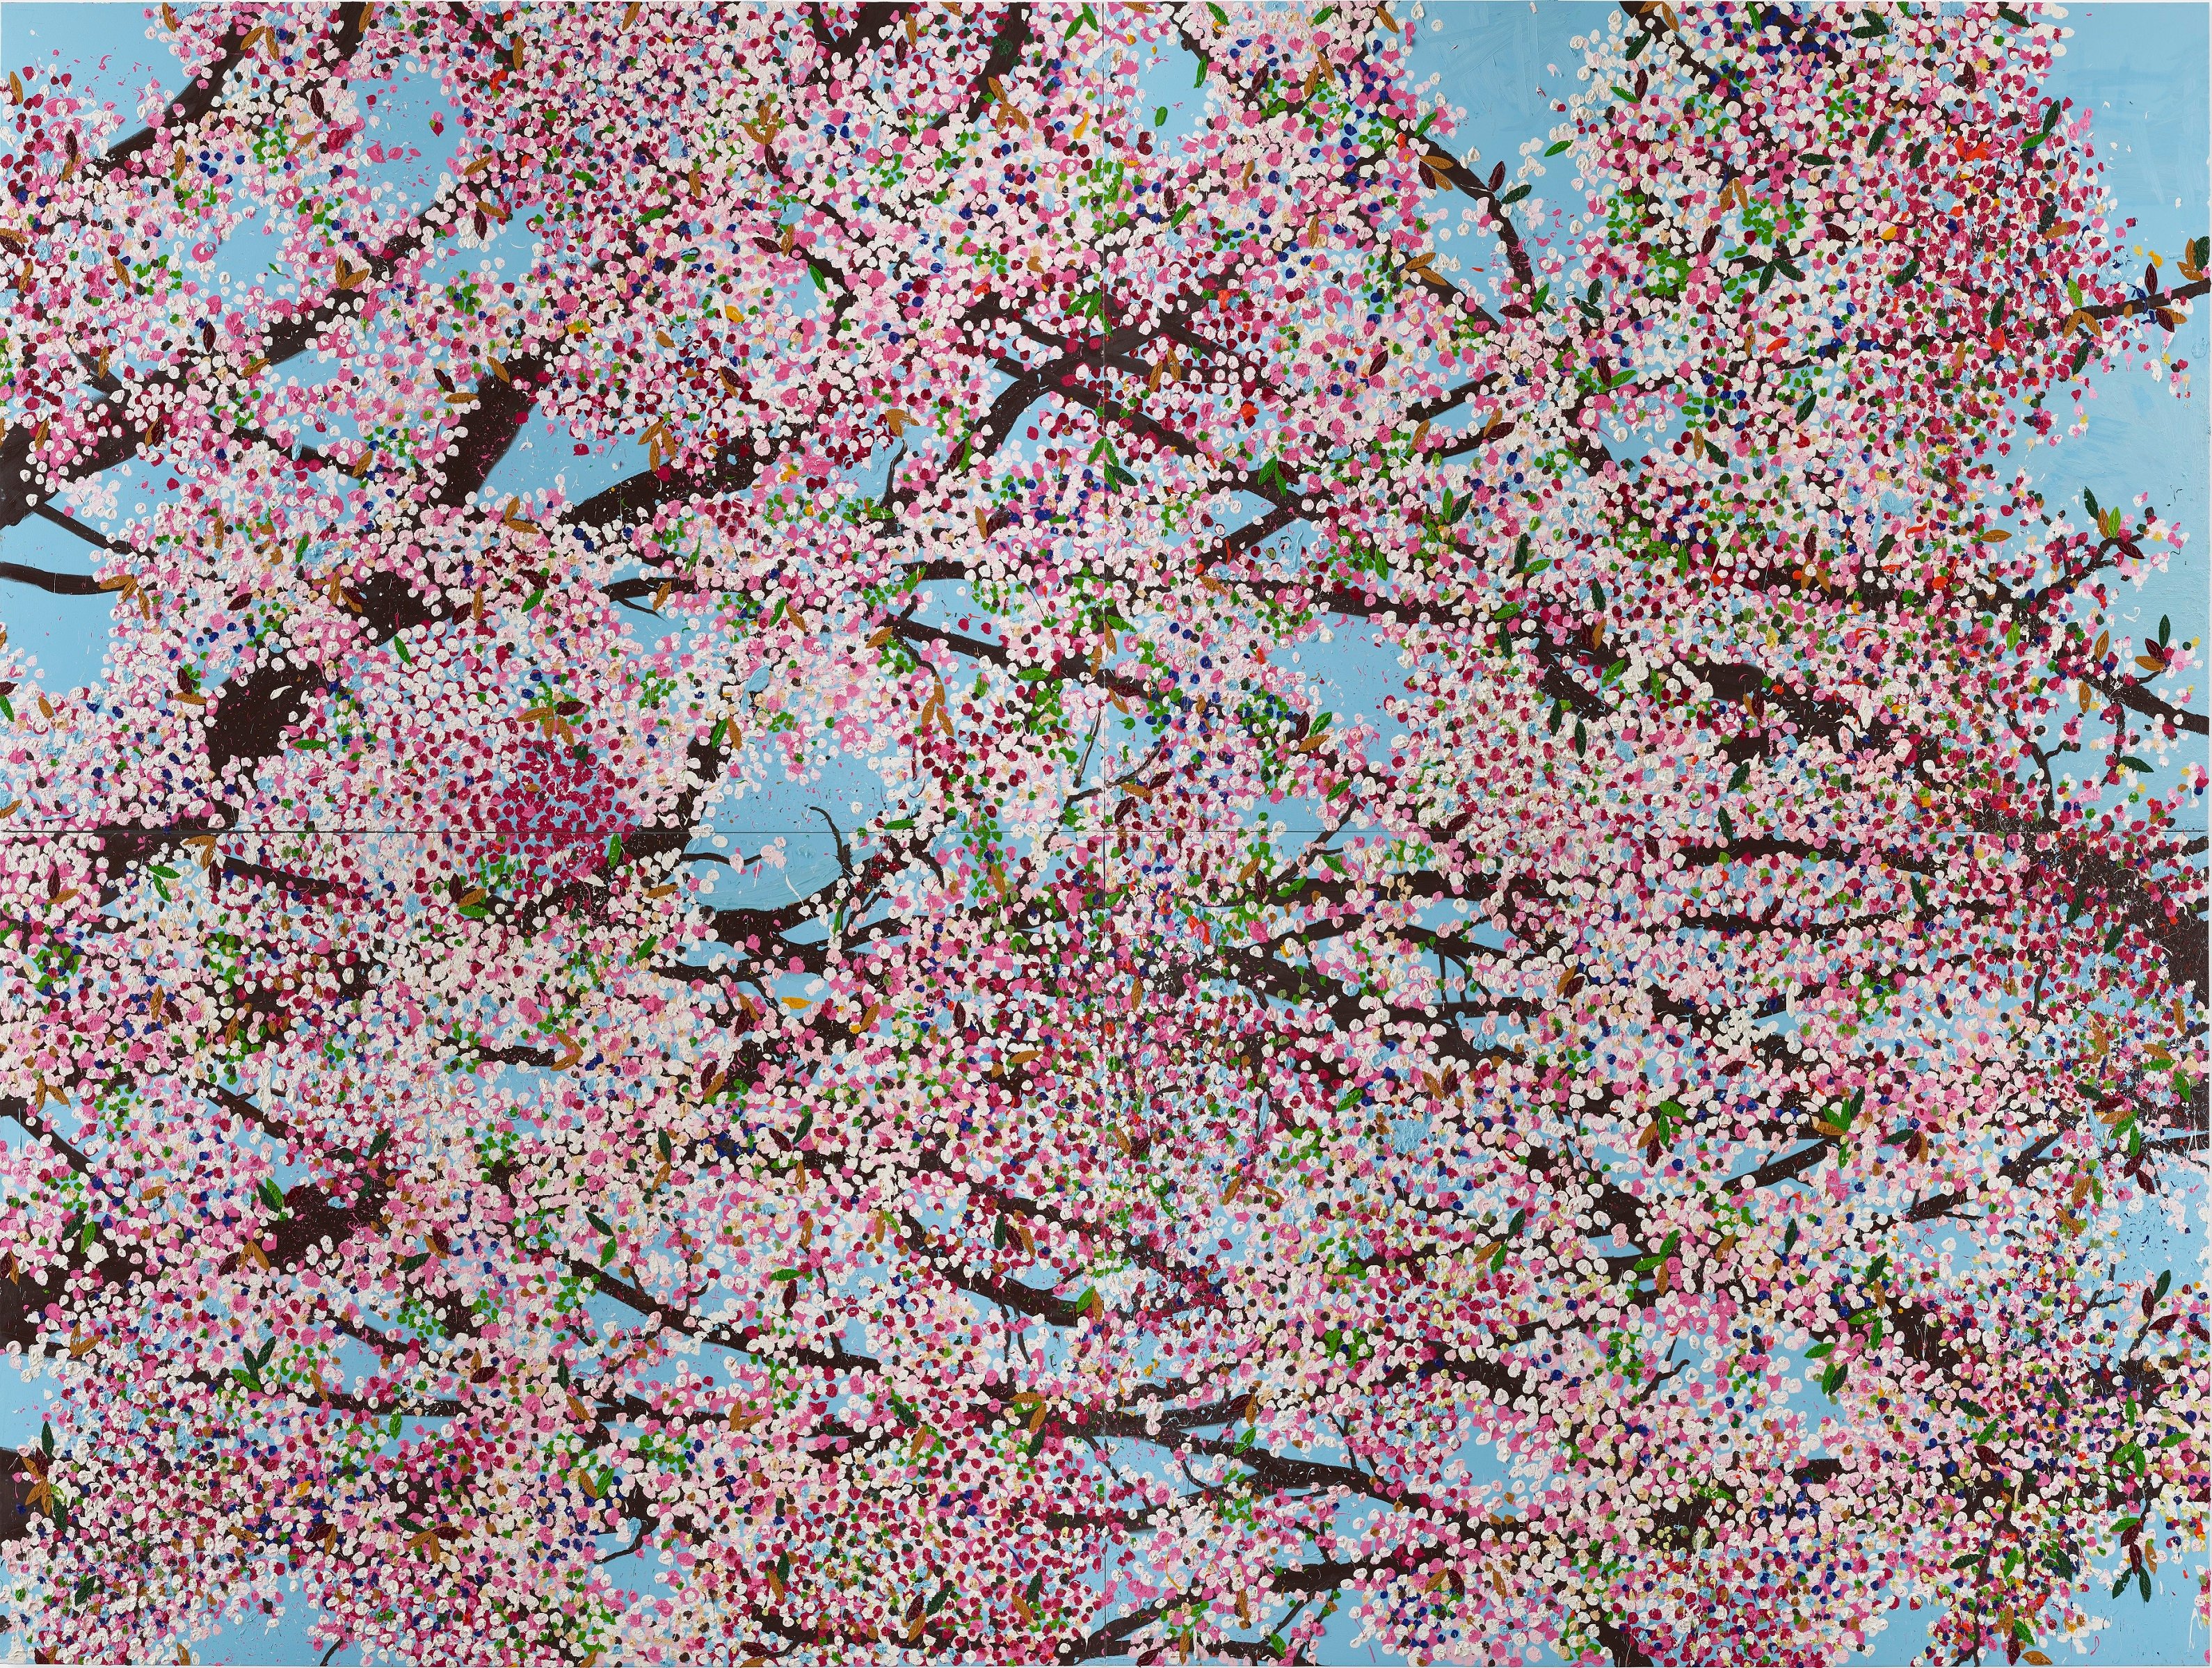 Damien Hirst's Cherry Blossom Paintings, a Sentimental Ode to the 